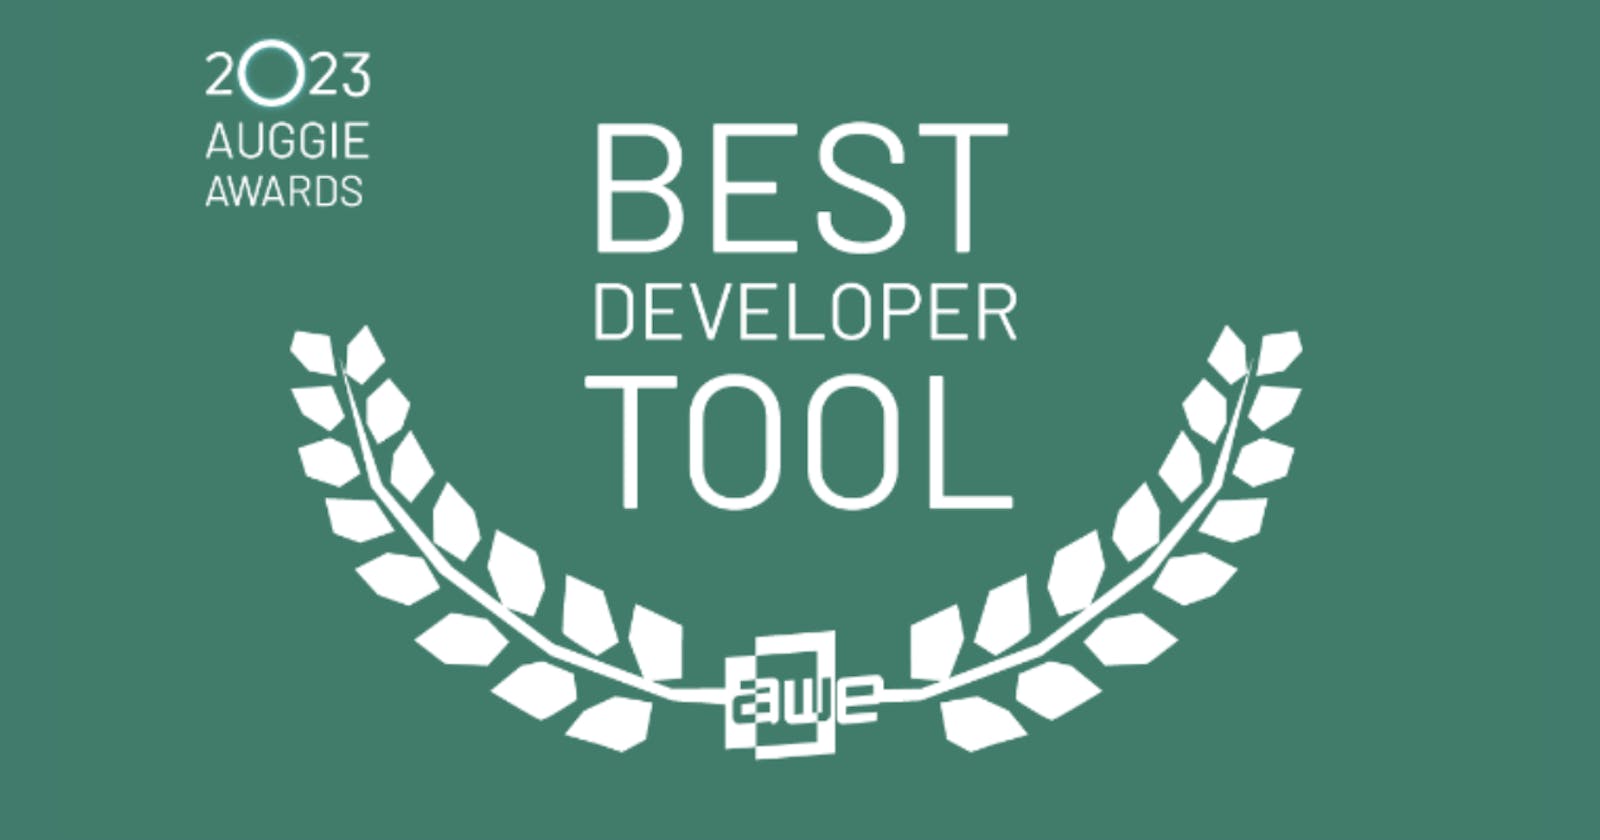 echo3D Nominated for AWE's AUGGIE Awards "Best Developer Tool" Category - Please Vote!